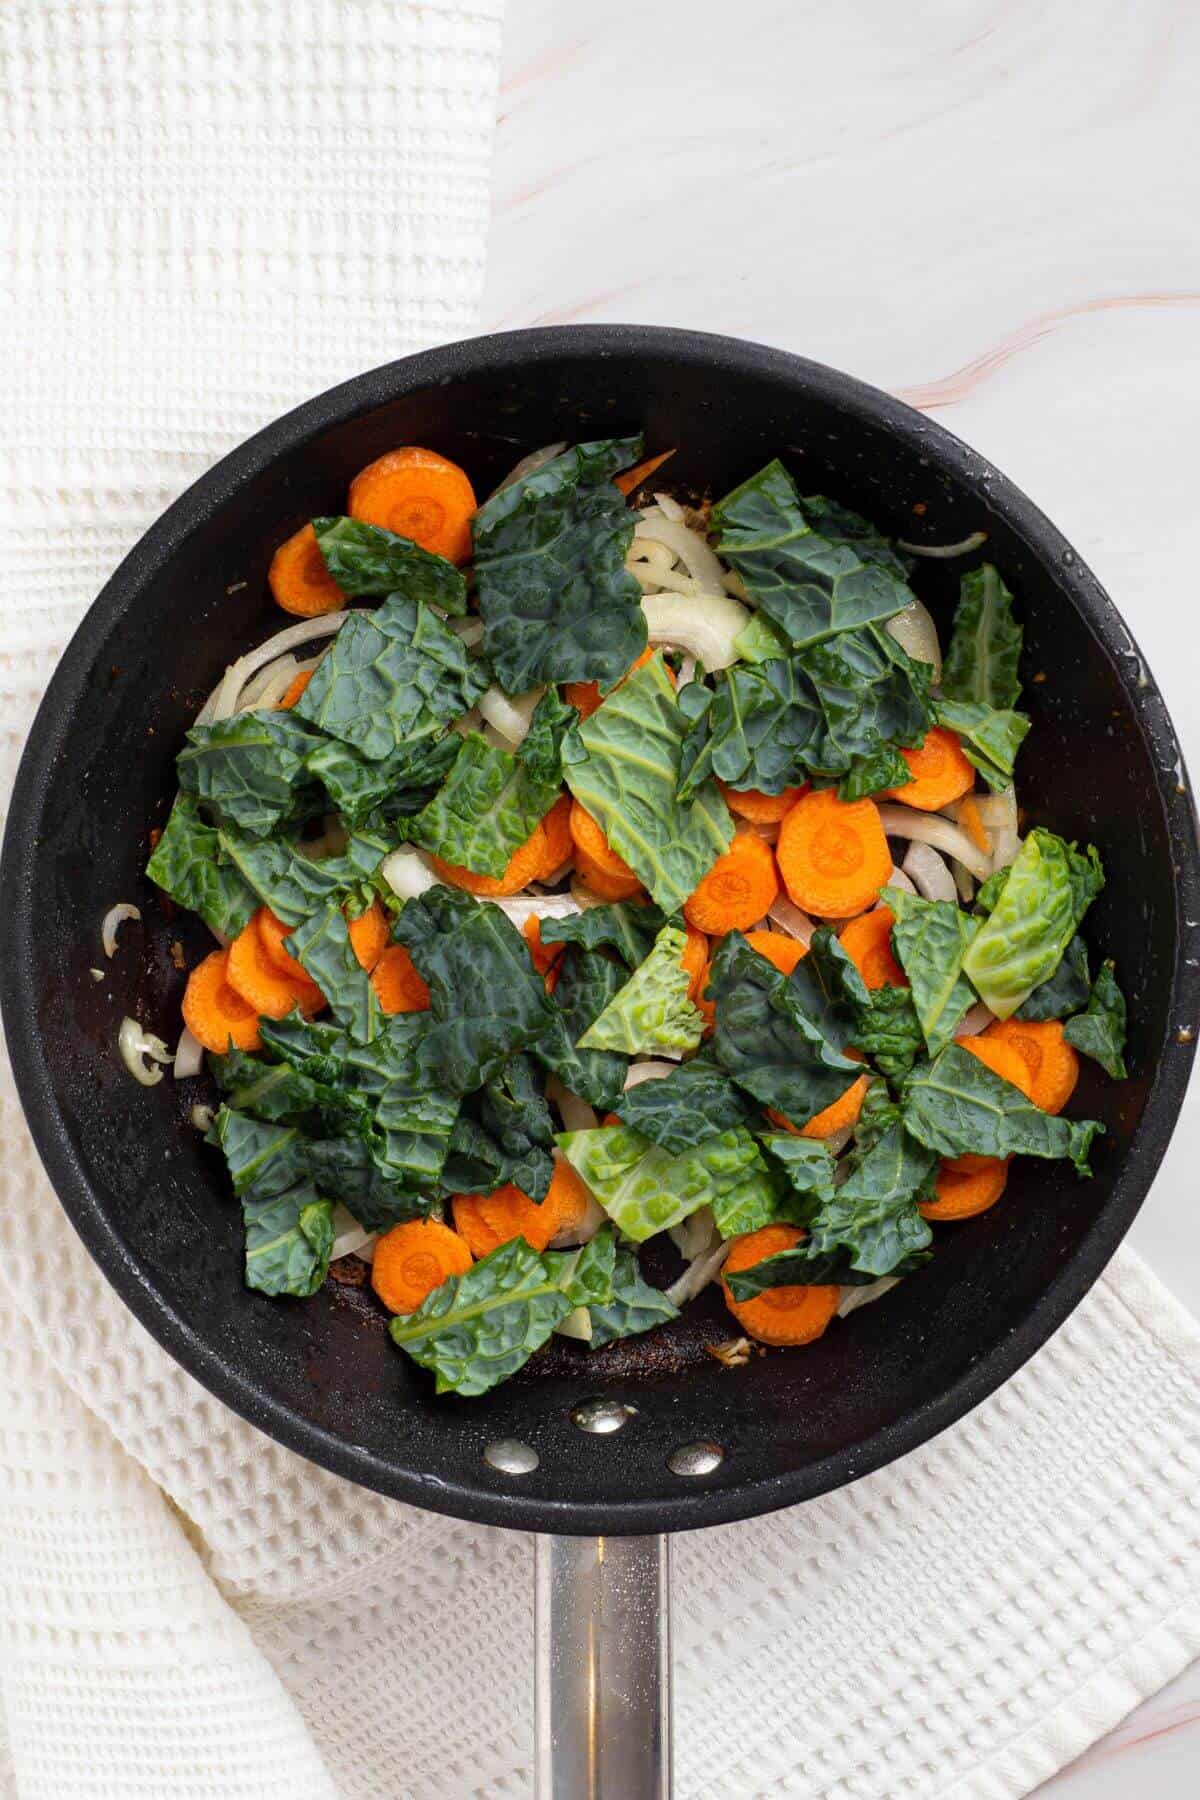 Carrots and cabbage added to skillet.